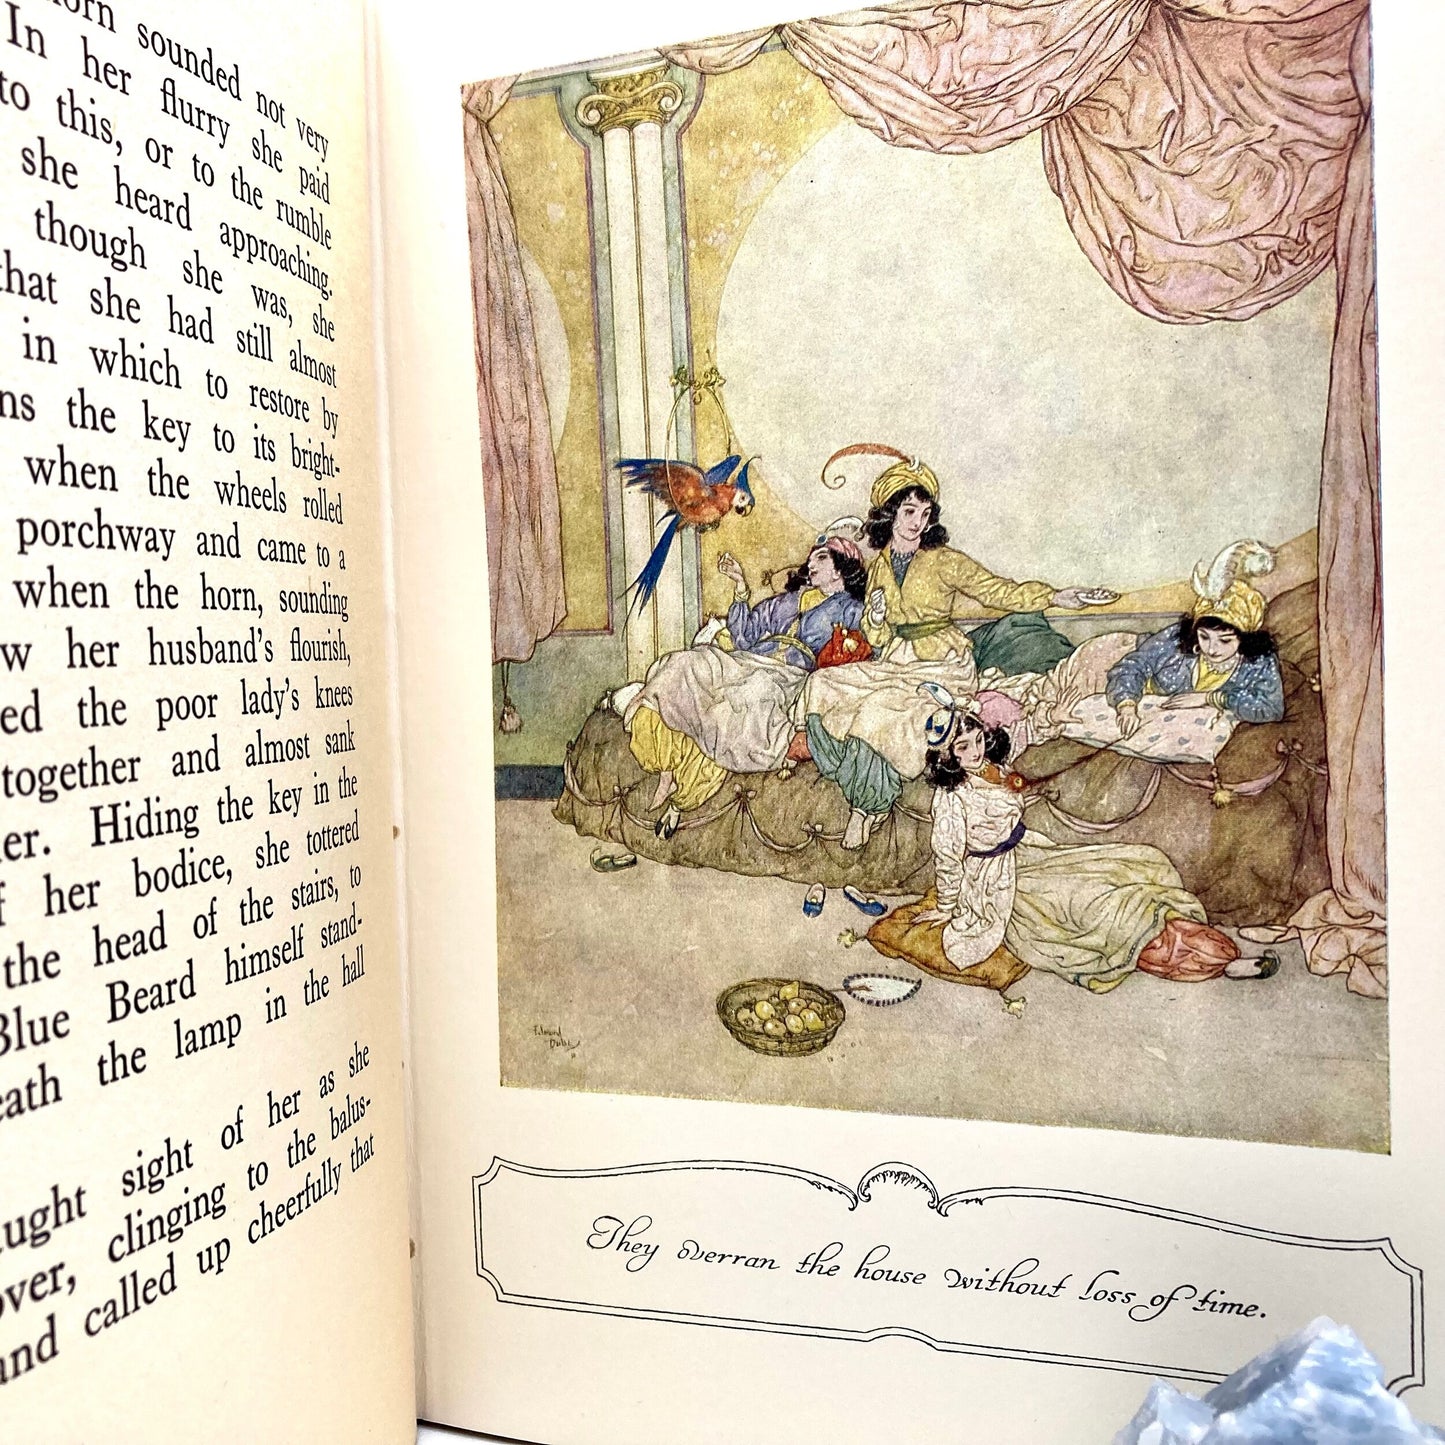 QUILLER COUCH, Sir Arthur "The Sleeping Beauty and Other Fairy Tales" [Hodder & Stoughton, 1938] - Buzz Bookstore